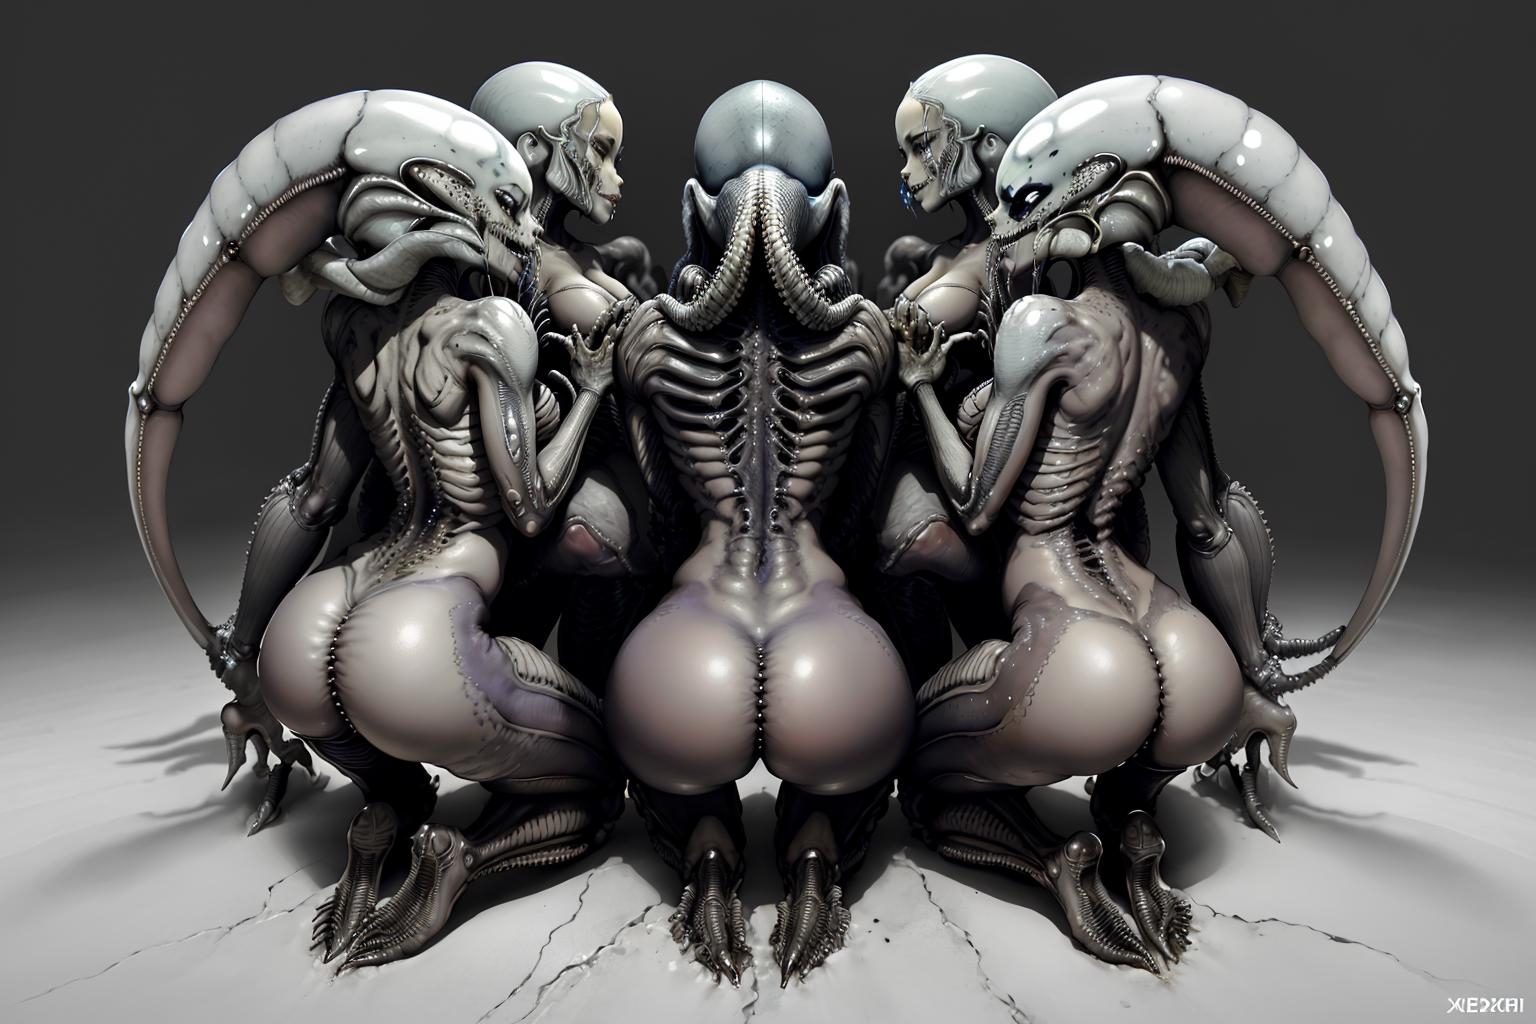 3 Alien Statues with Large Butts and Tentacles: An Artistic Display